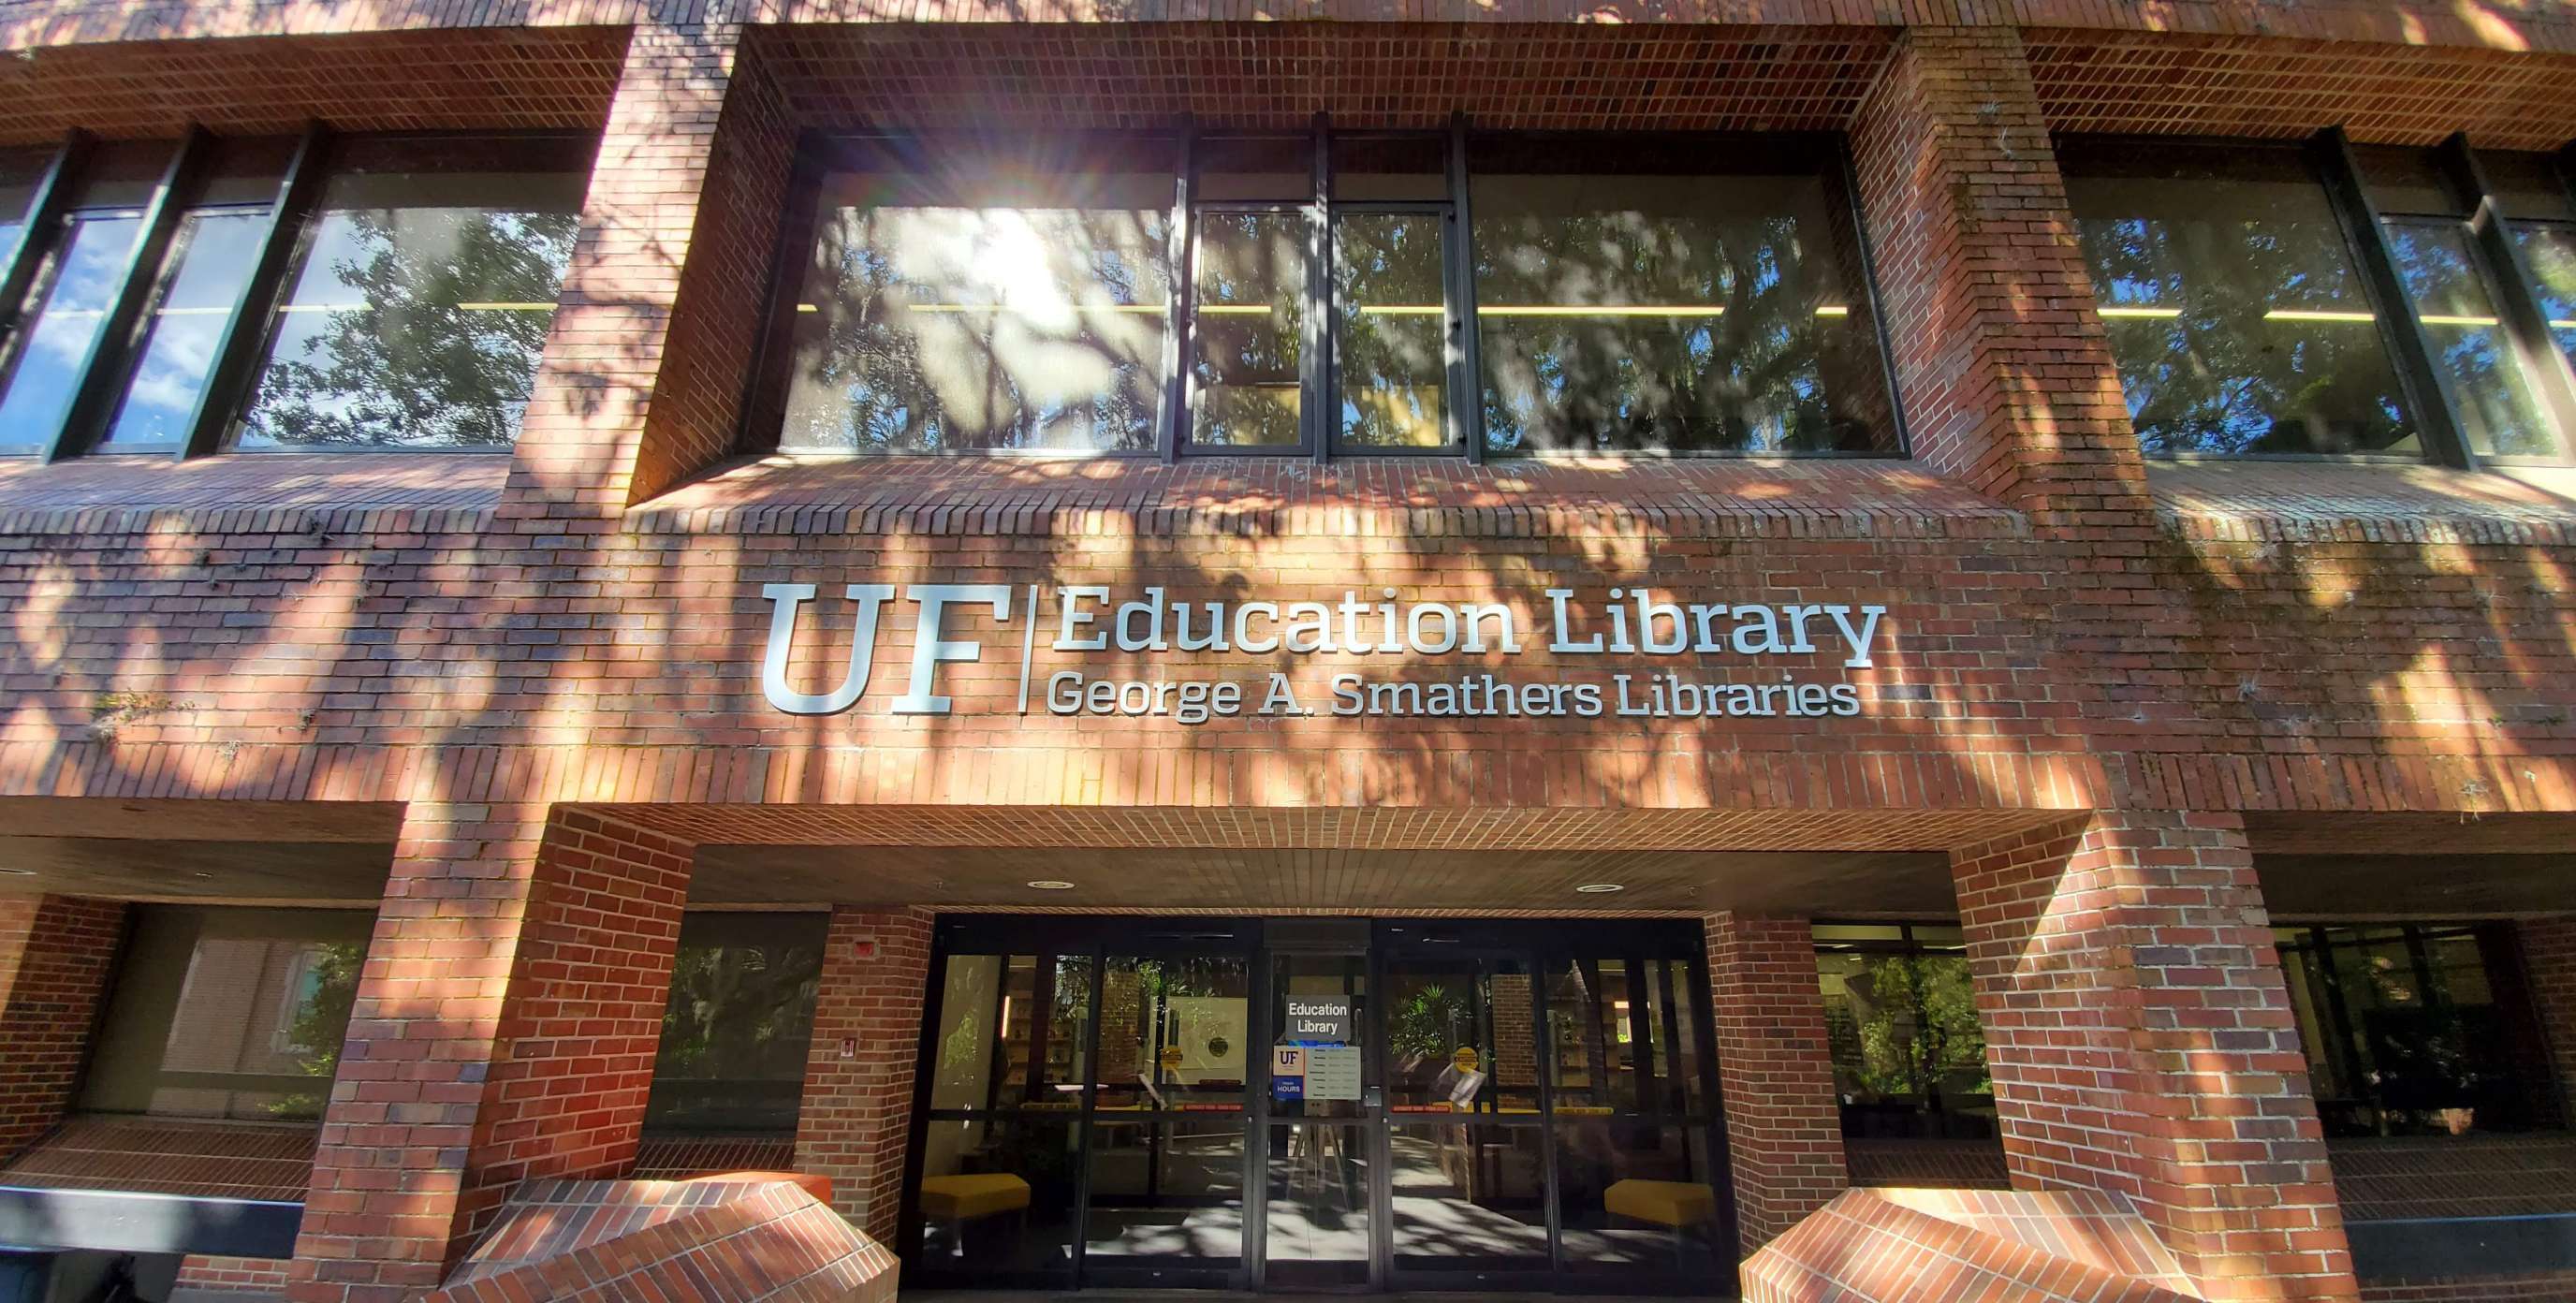 Education Library at the University of Florida in Gainesville.